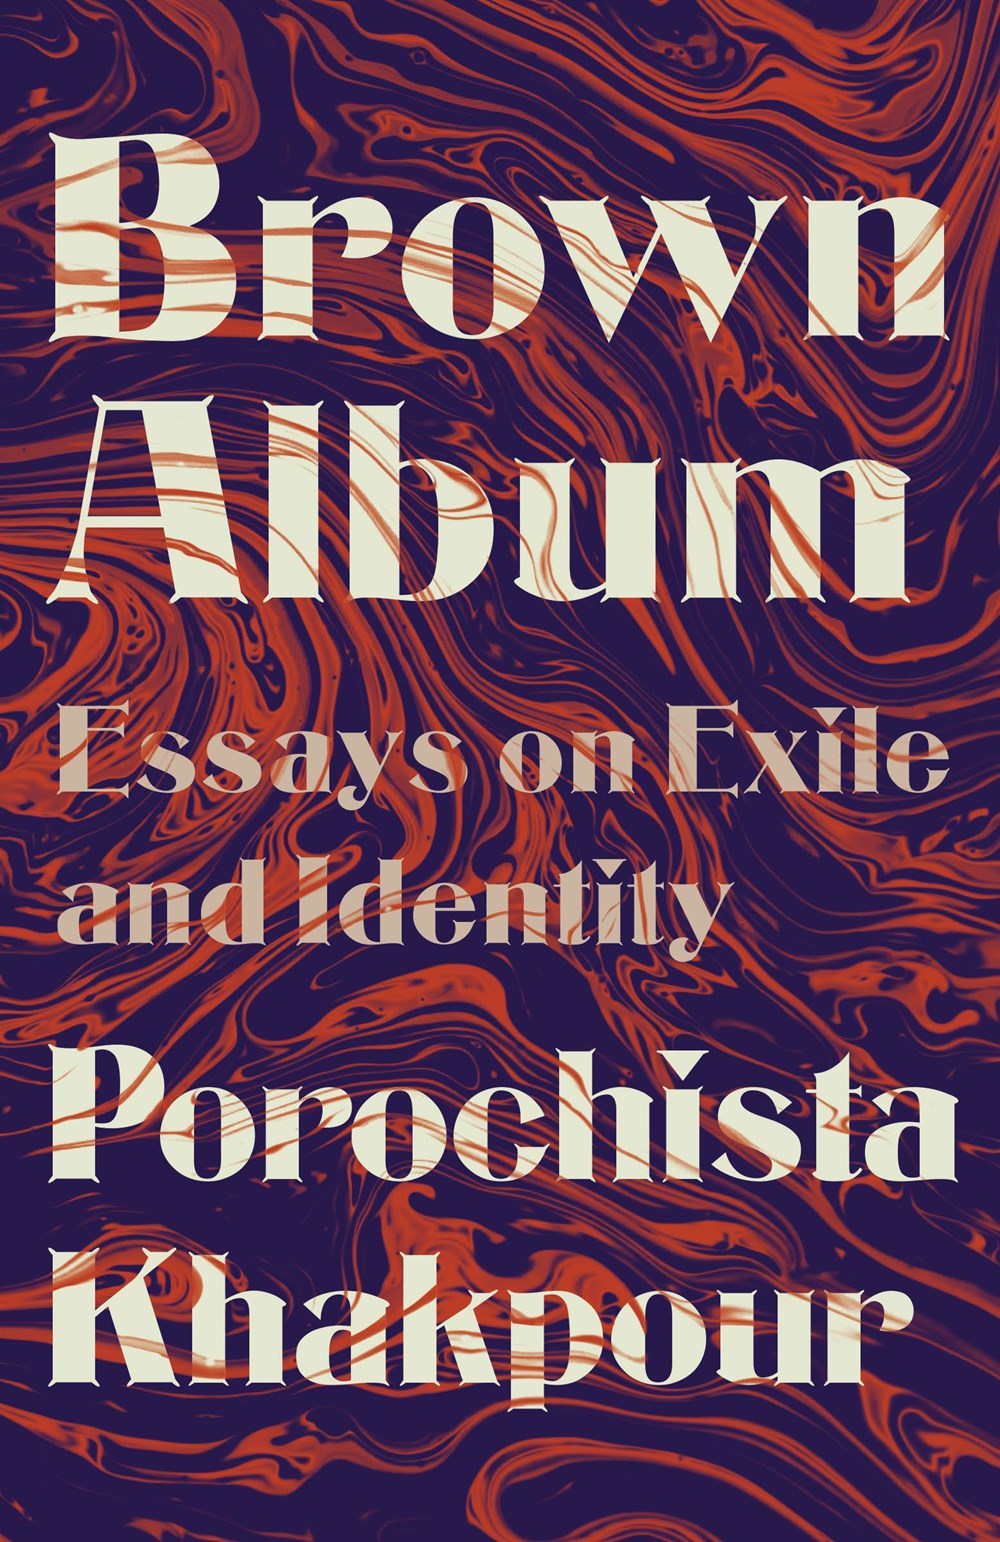 Brown Album: Esssays on Exile and Identity by Porochista Khakpour